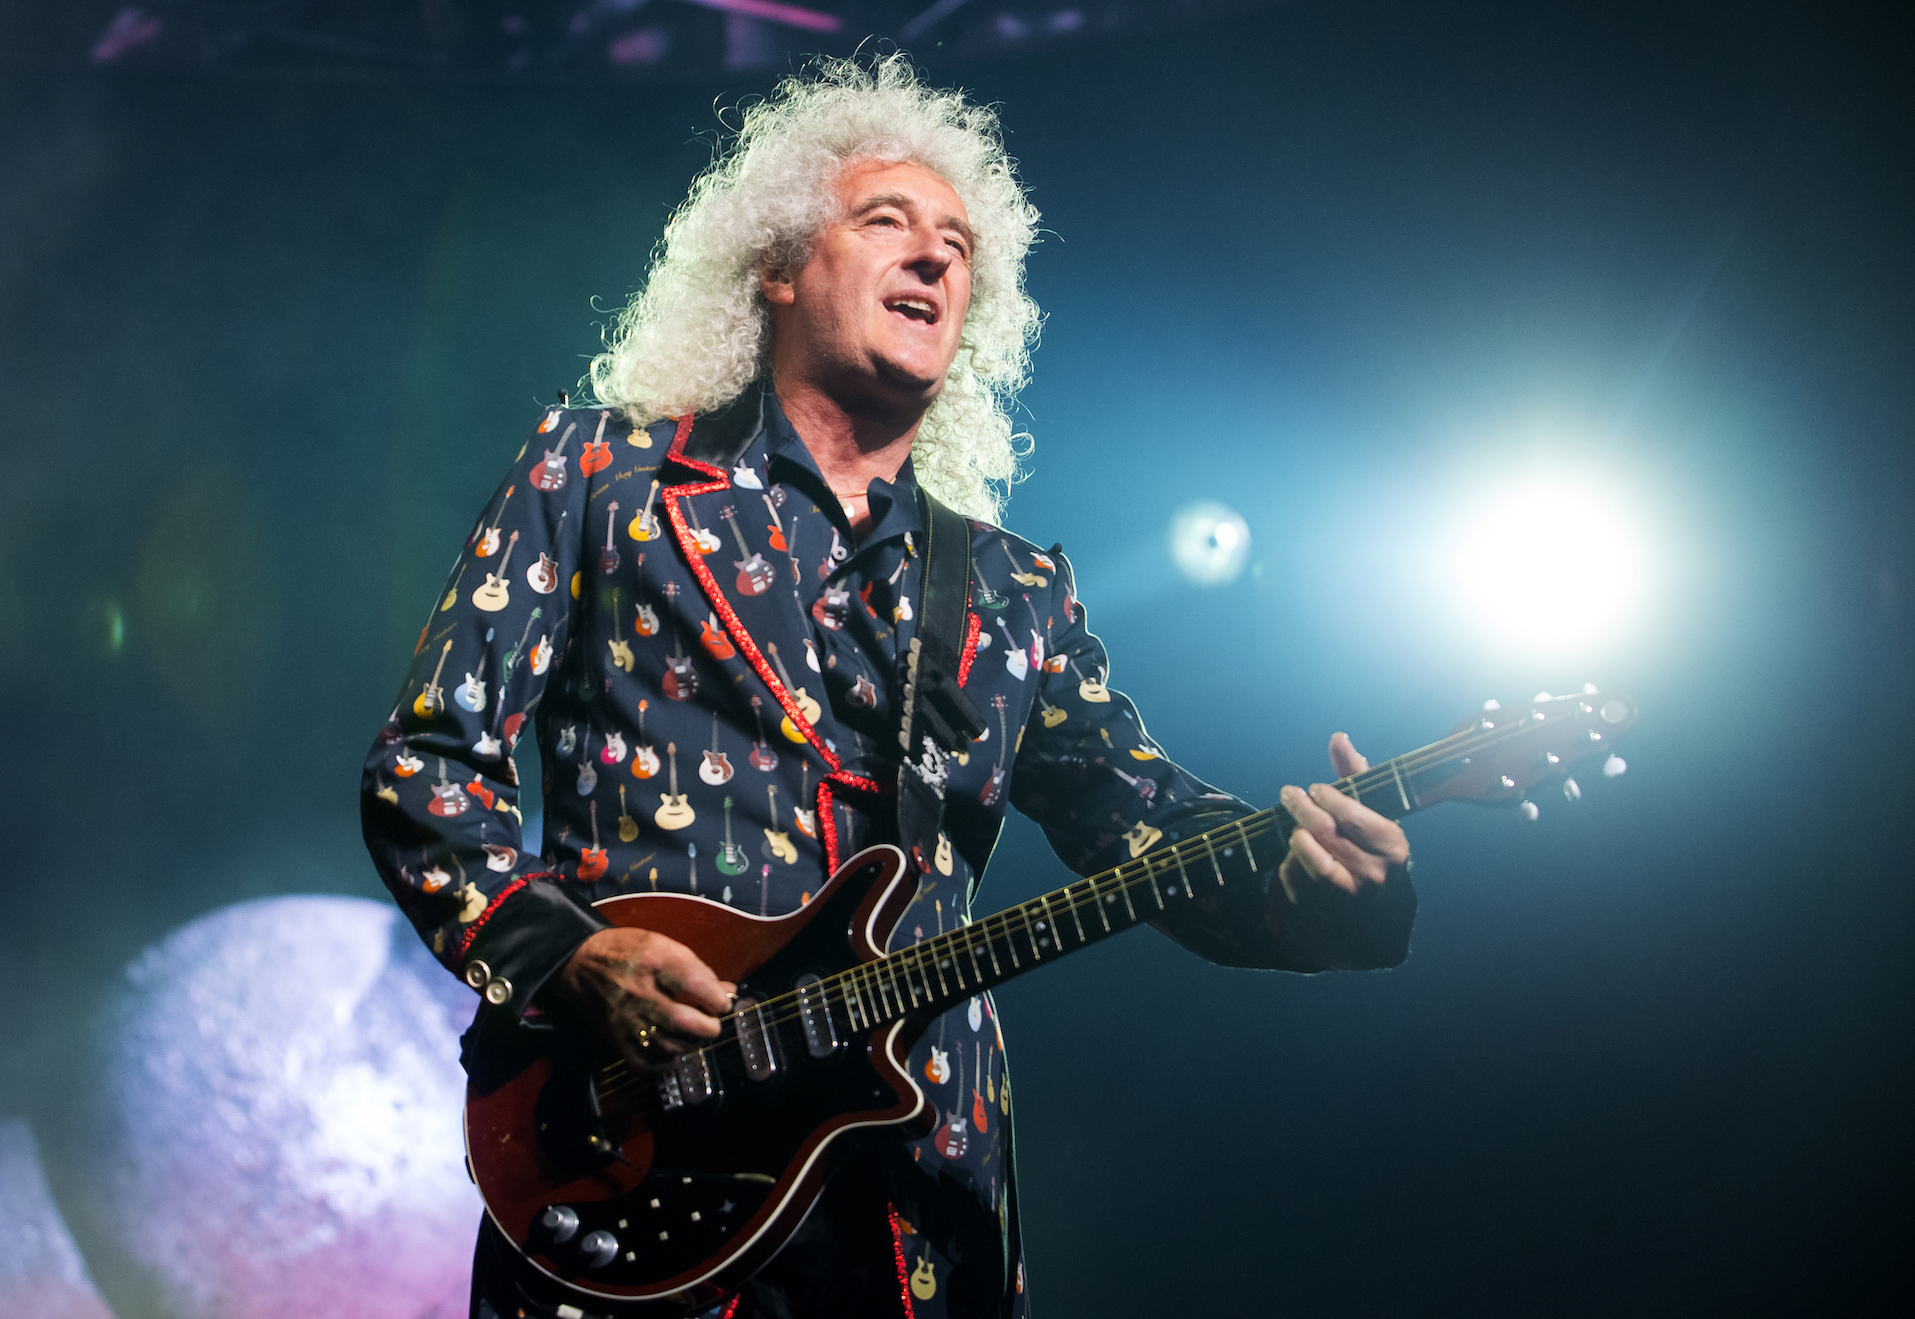 Brian May of queen performs at the O2 Arena in London, England